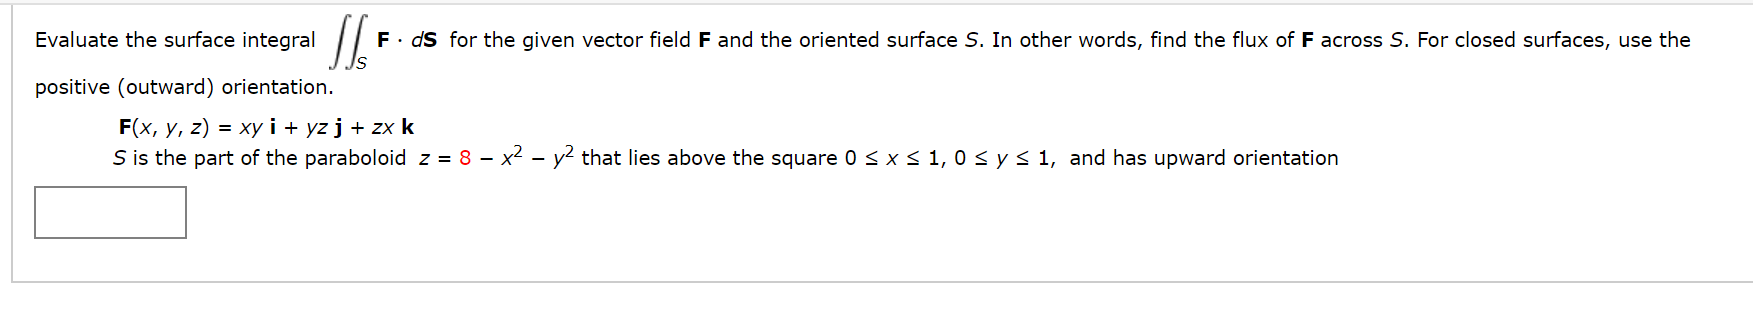 Evaluate the surface integral
F. ds for the given vector field F and the oriented surface S. In other words, find the flux of F across S. For closed surfaces, use the
positive (outward) orientation.
F(x, y, z) = xy i + yz j + zx k
S is the part of the paraboloid z = 8 – x2 - y? that lies above the square 0< x< 1, 0 < y< 1, and has upward orientation
